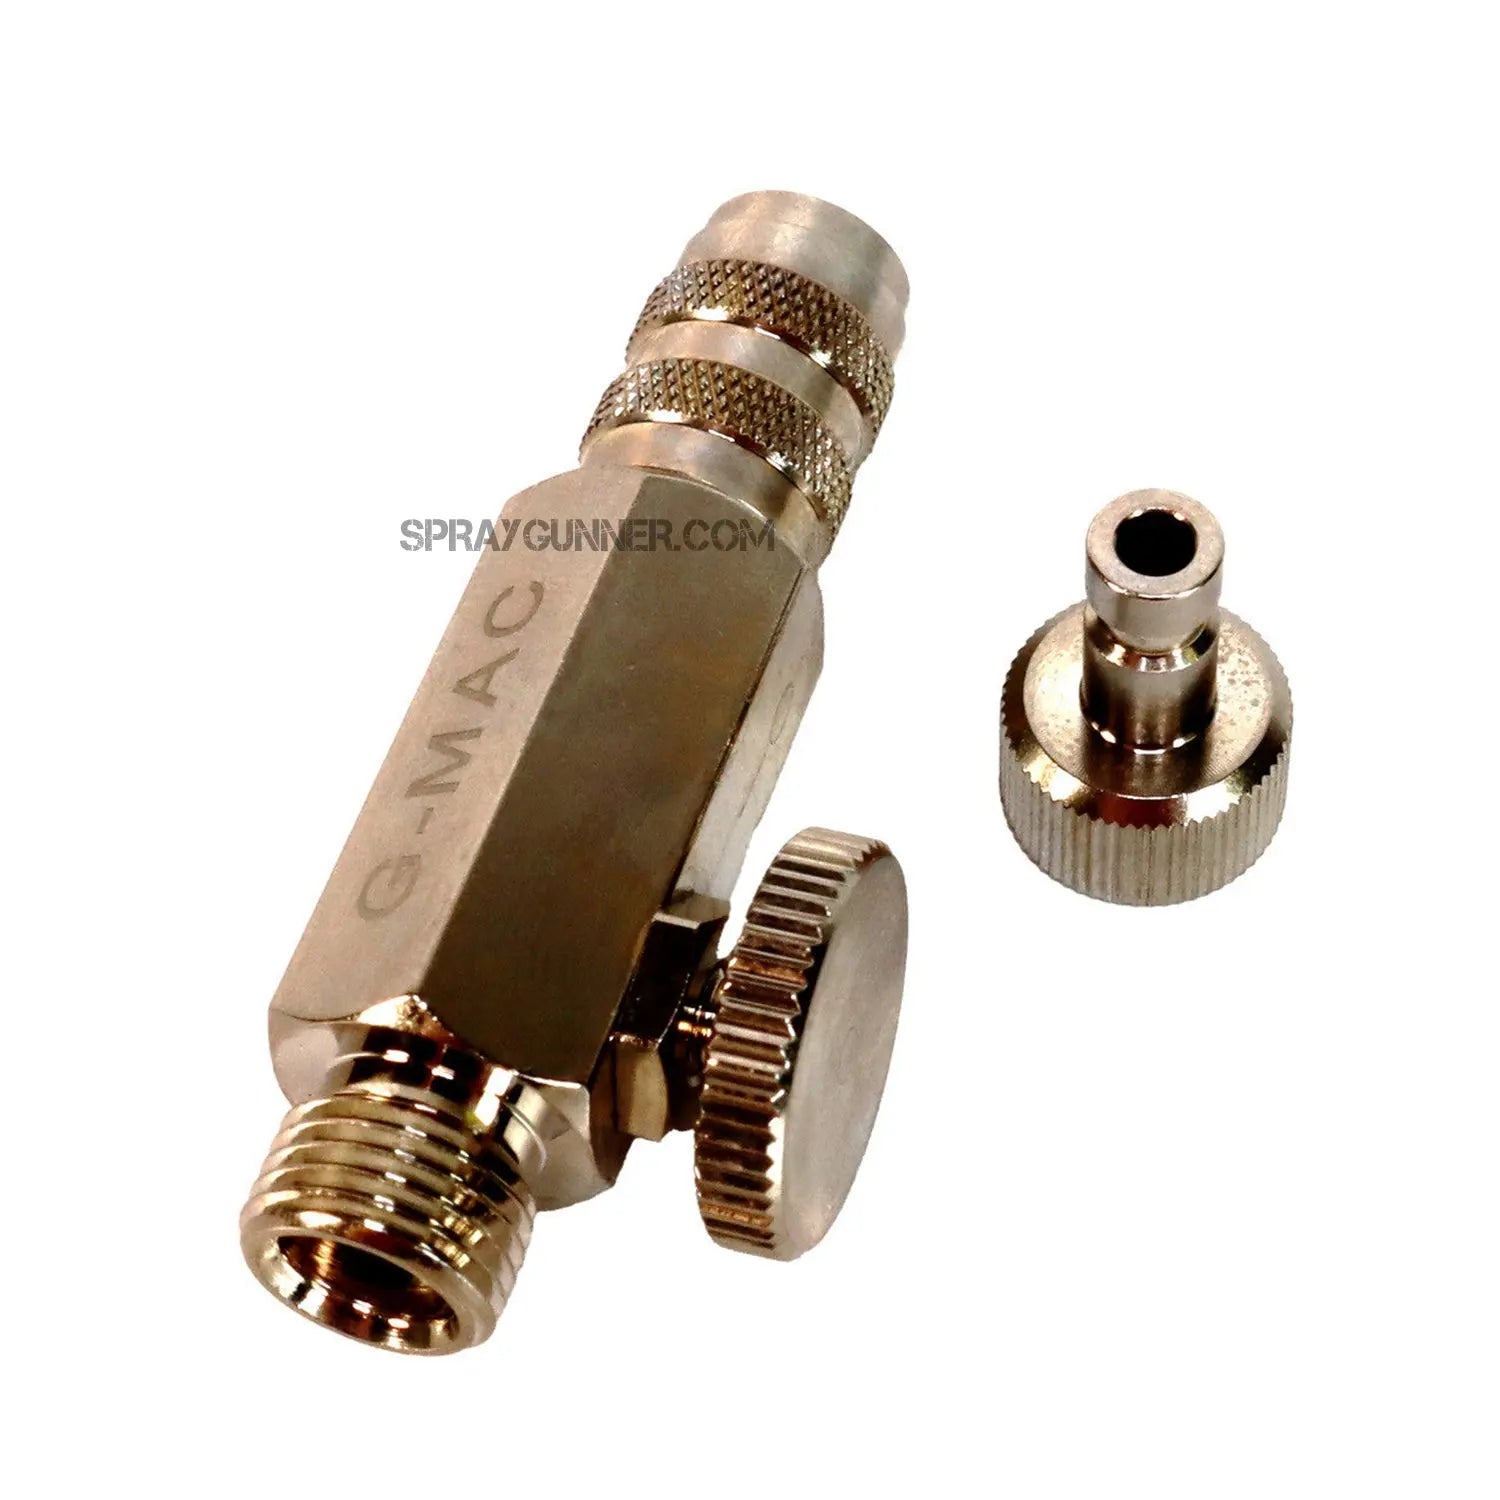 Grex Micro Air Control Valve with Quick Connect Grex Airbrush